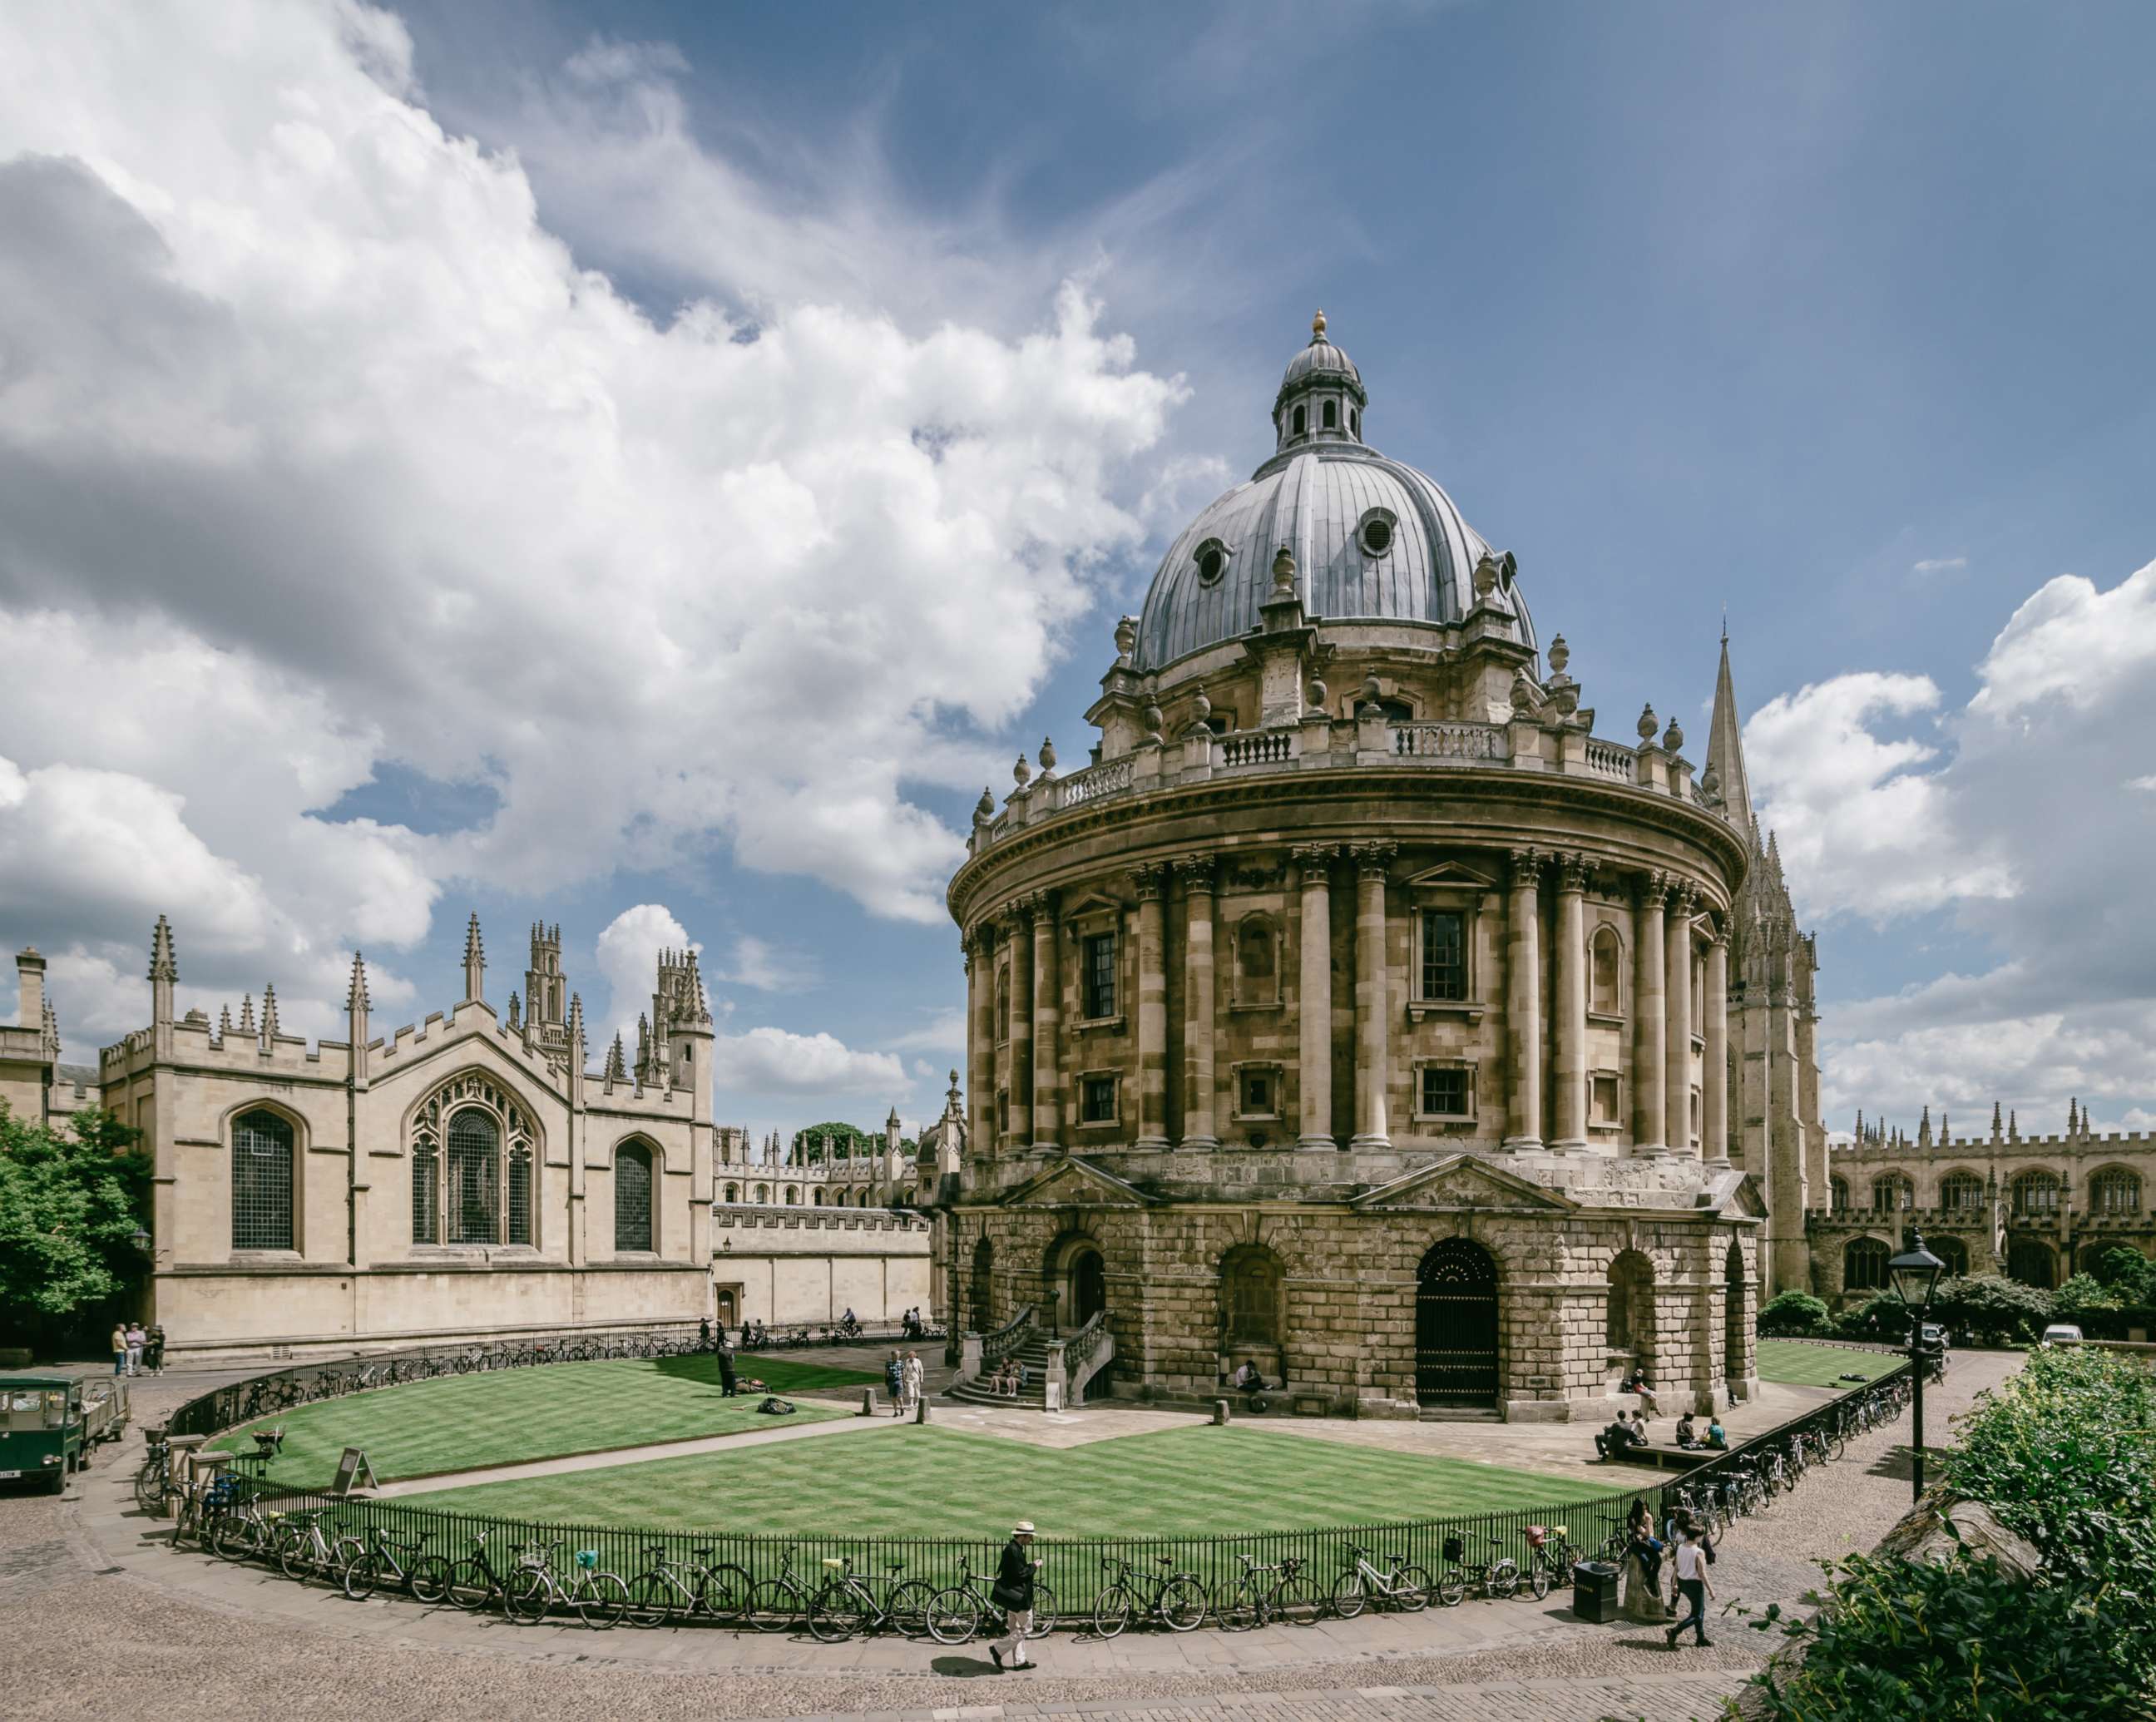 PHOTO: The Radcliffe Camera at Oxford University in Oxford, England was built in the Neo-Classical style in the 1700's to house the Radcliffe Science Library.